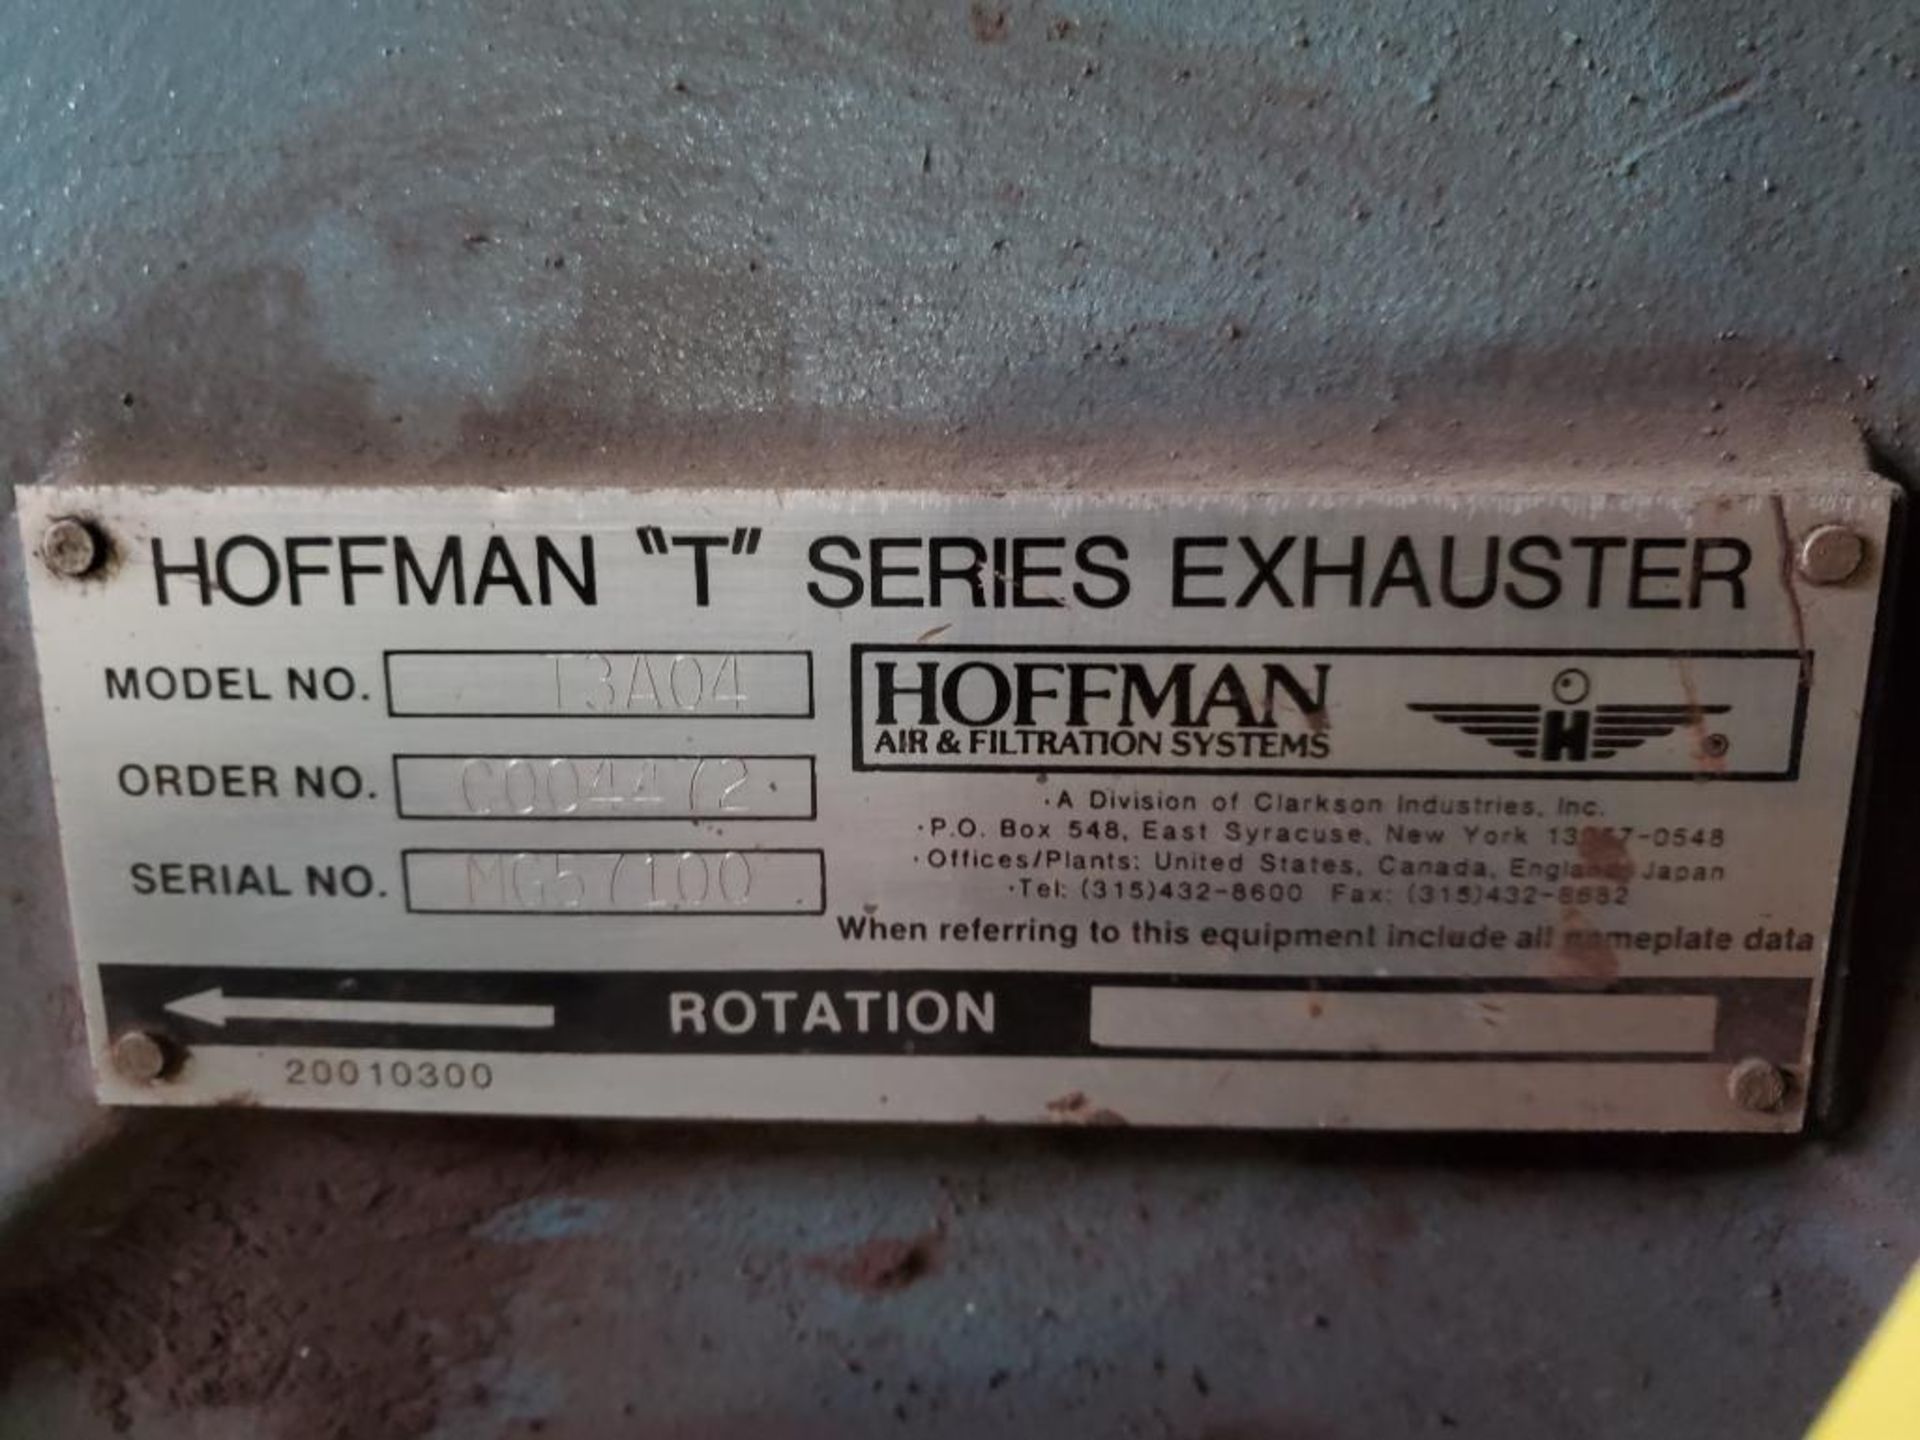 Hoffman T Series Exhauster, Model T3A04, 30 HP - Image 5 of 6